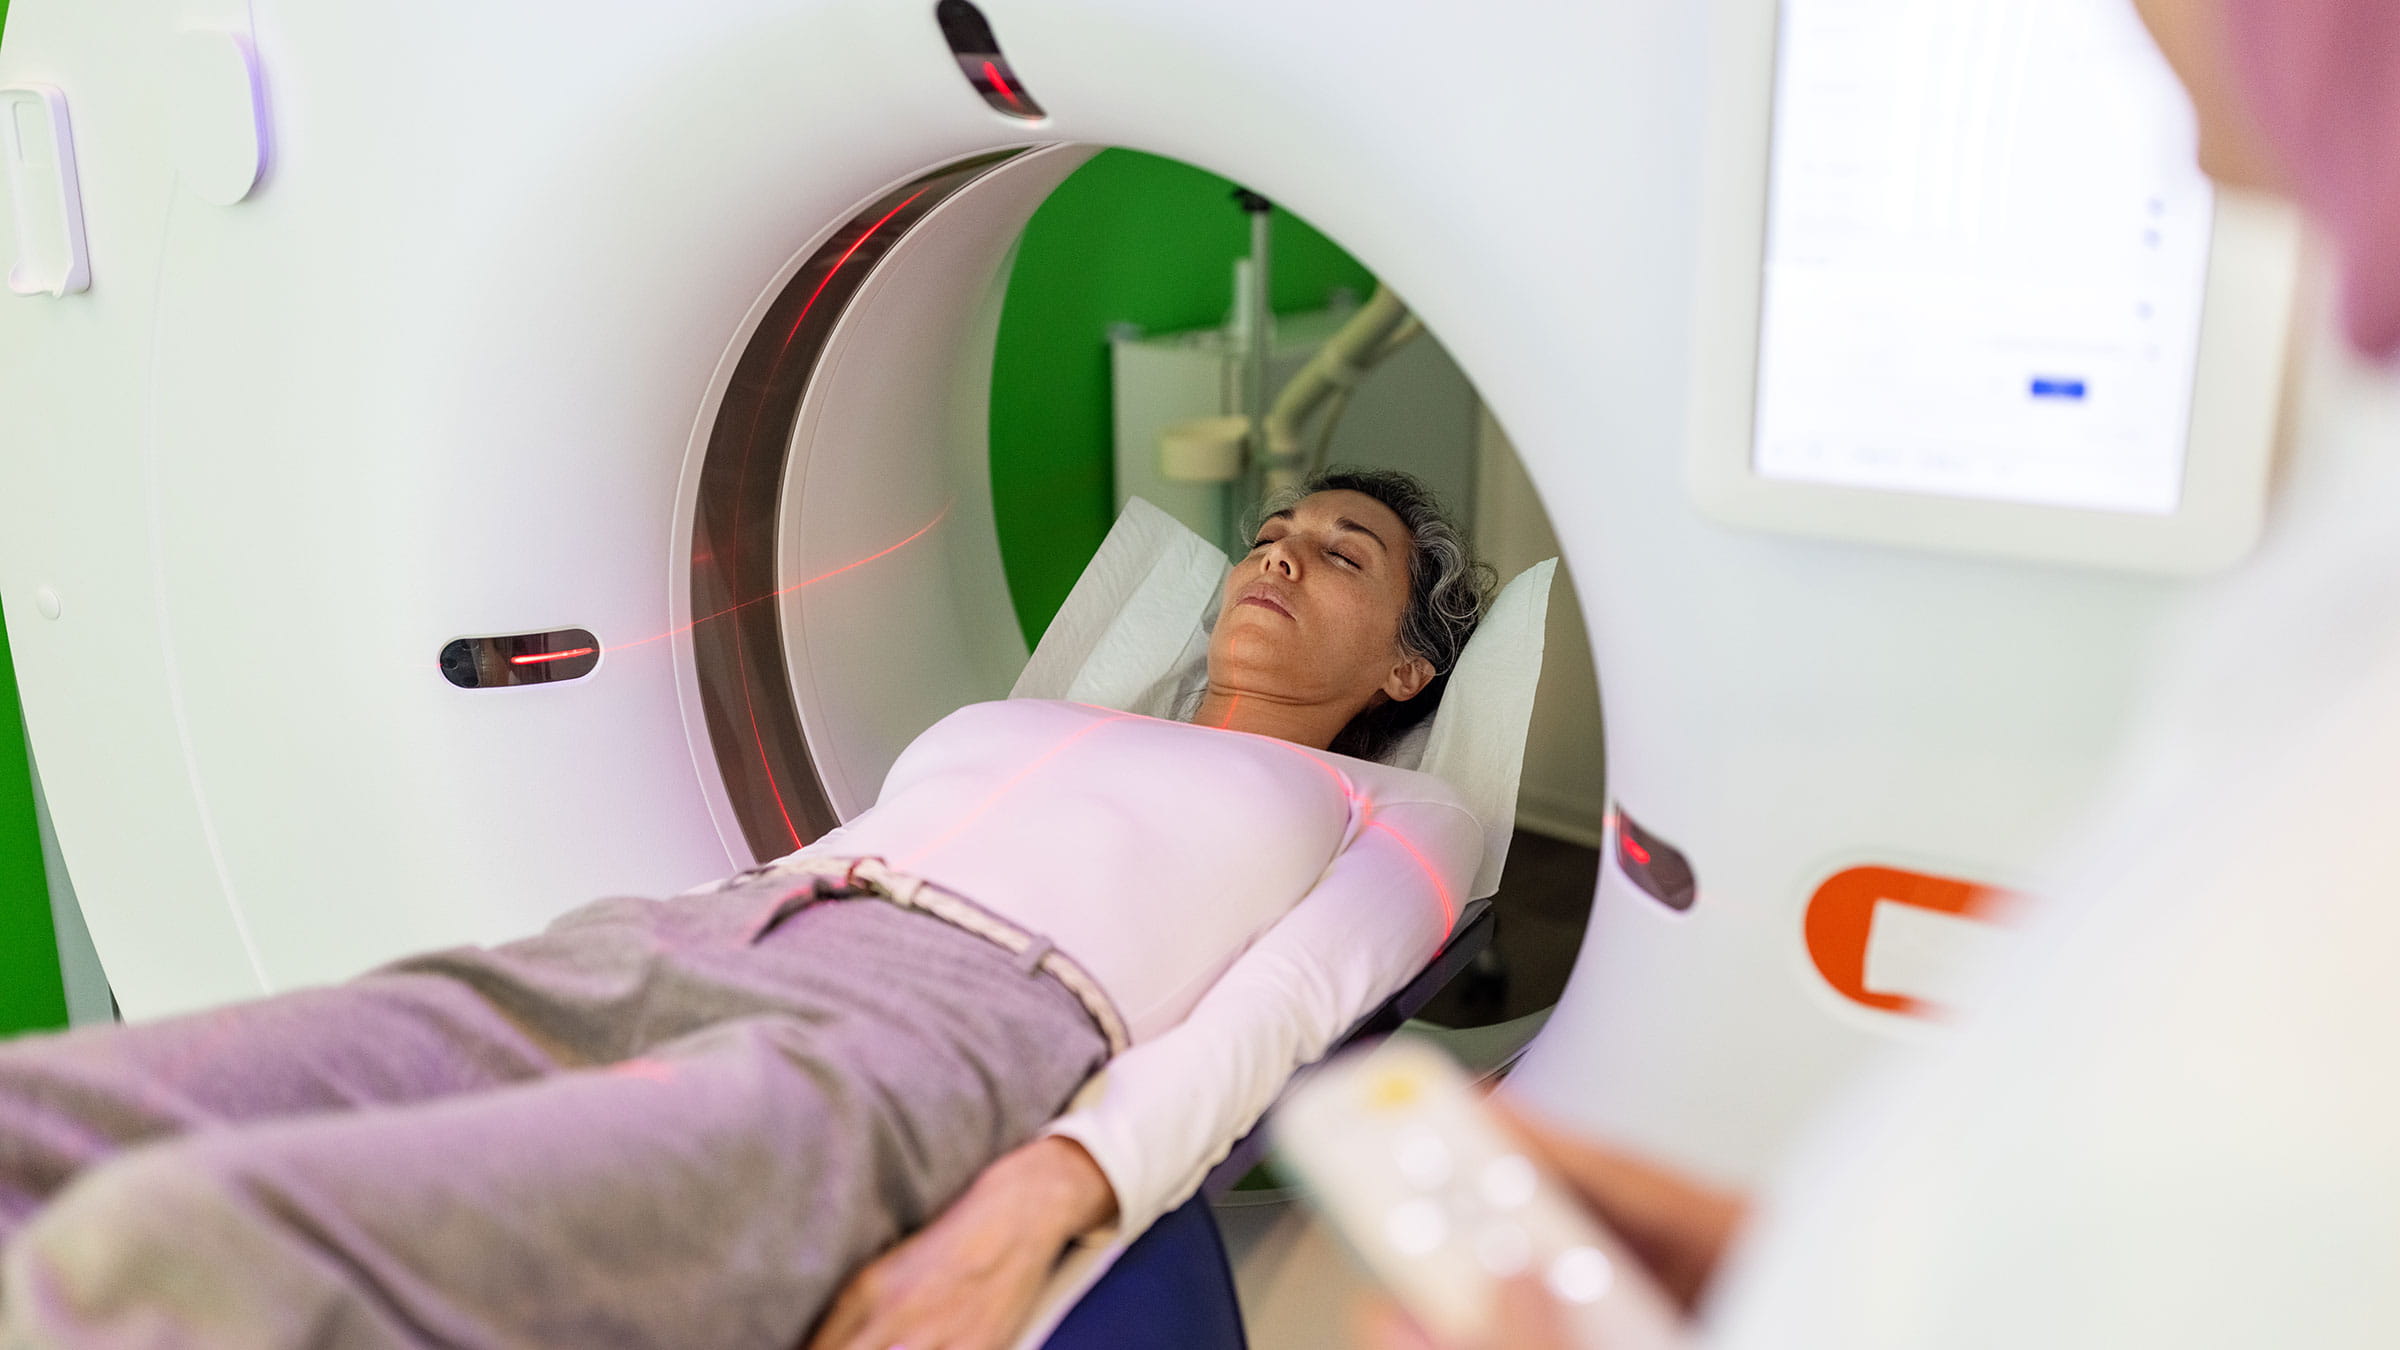 Female patient undergoes a CT scan for heart screening